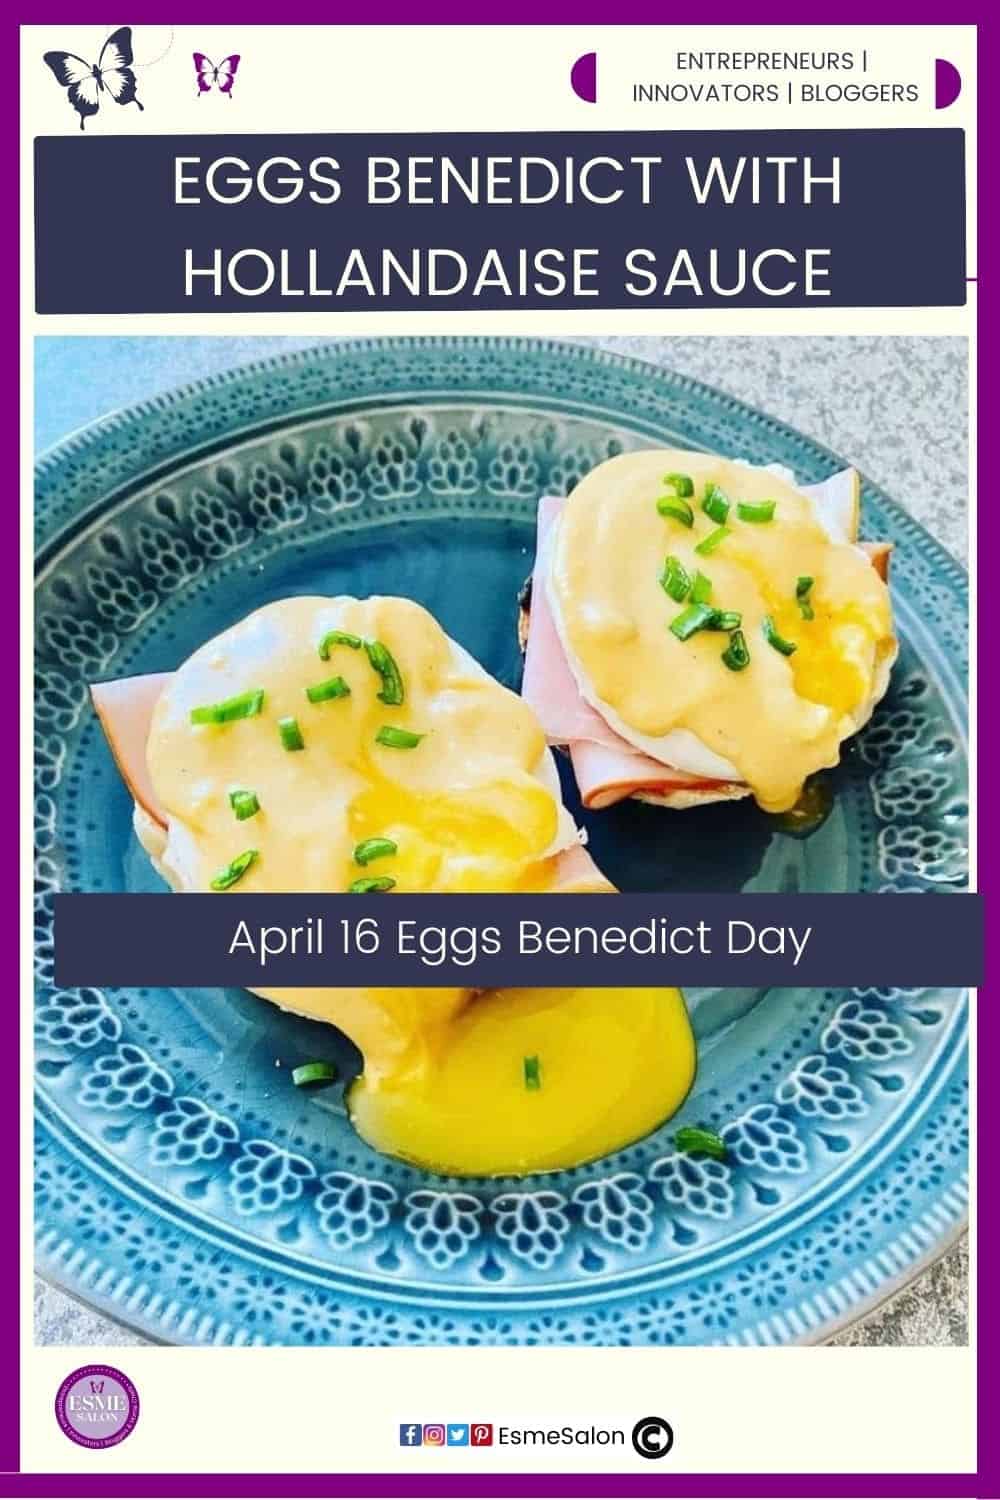 an image of an Easy Eggs Benedict Foolproof Homemade Hollandaise Sauce on a toasted English muffin